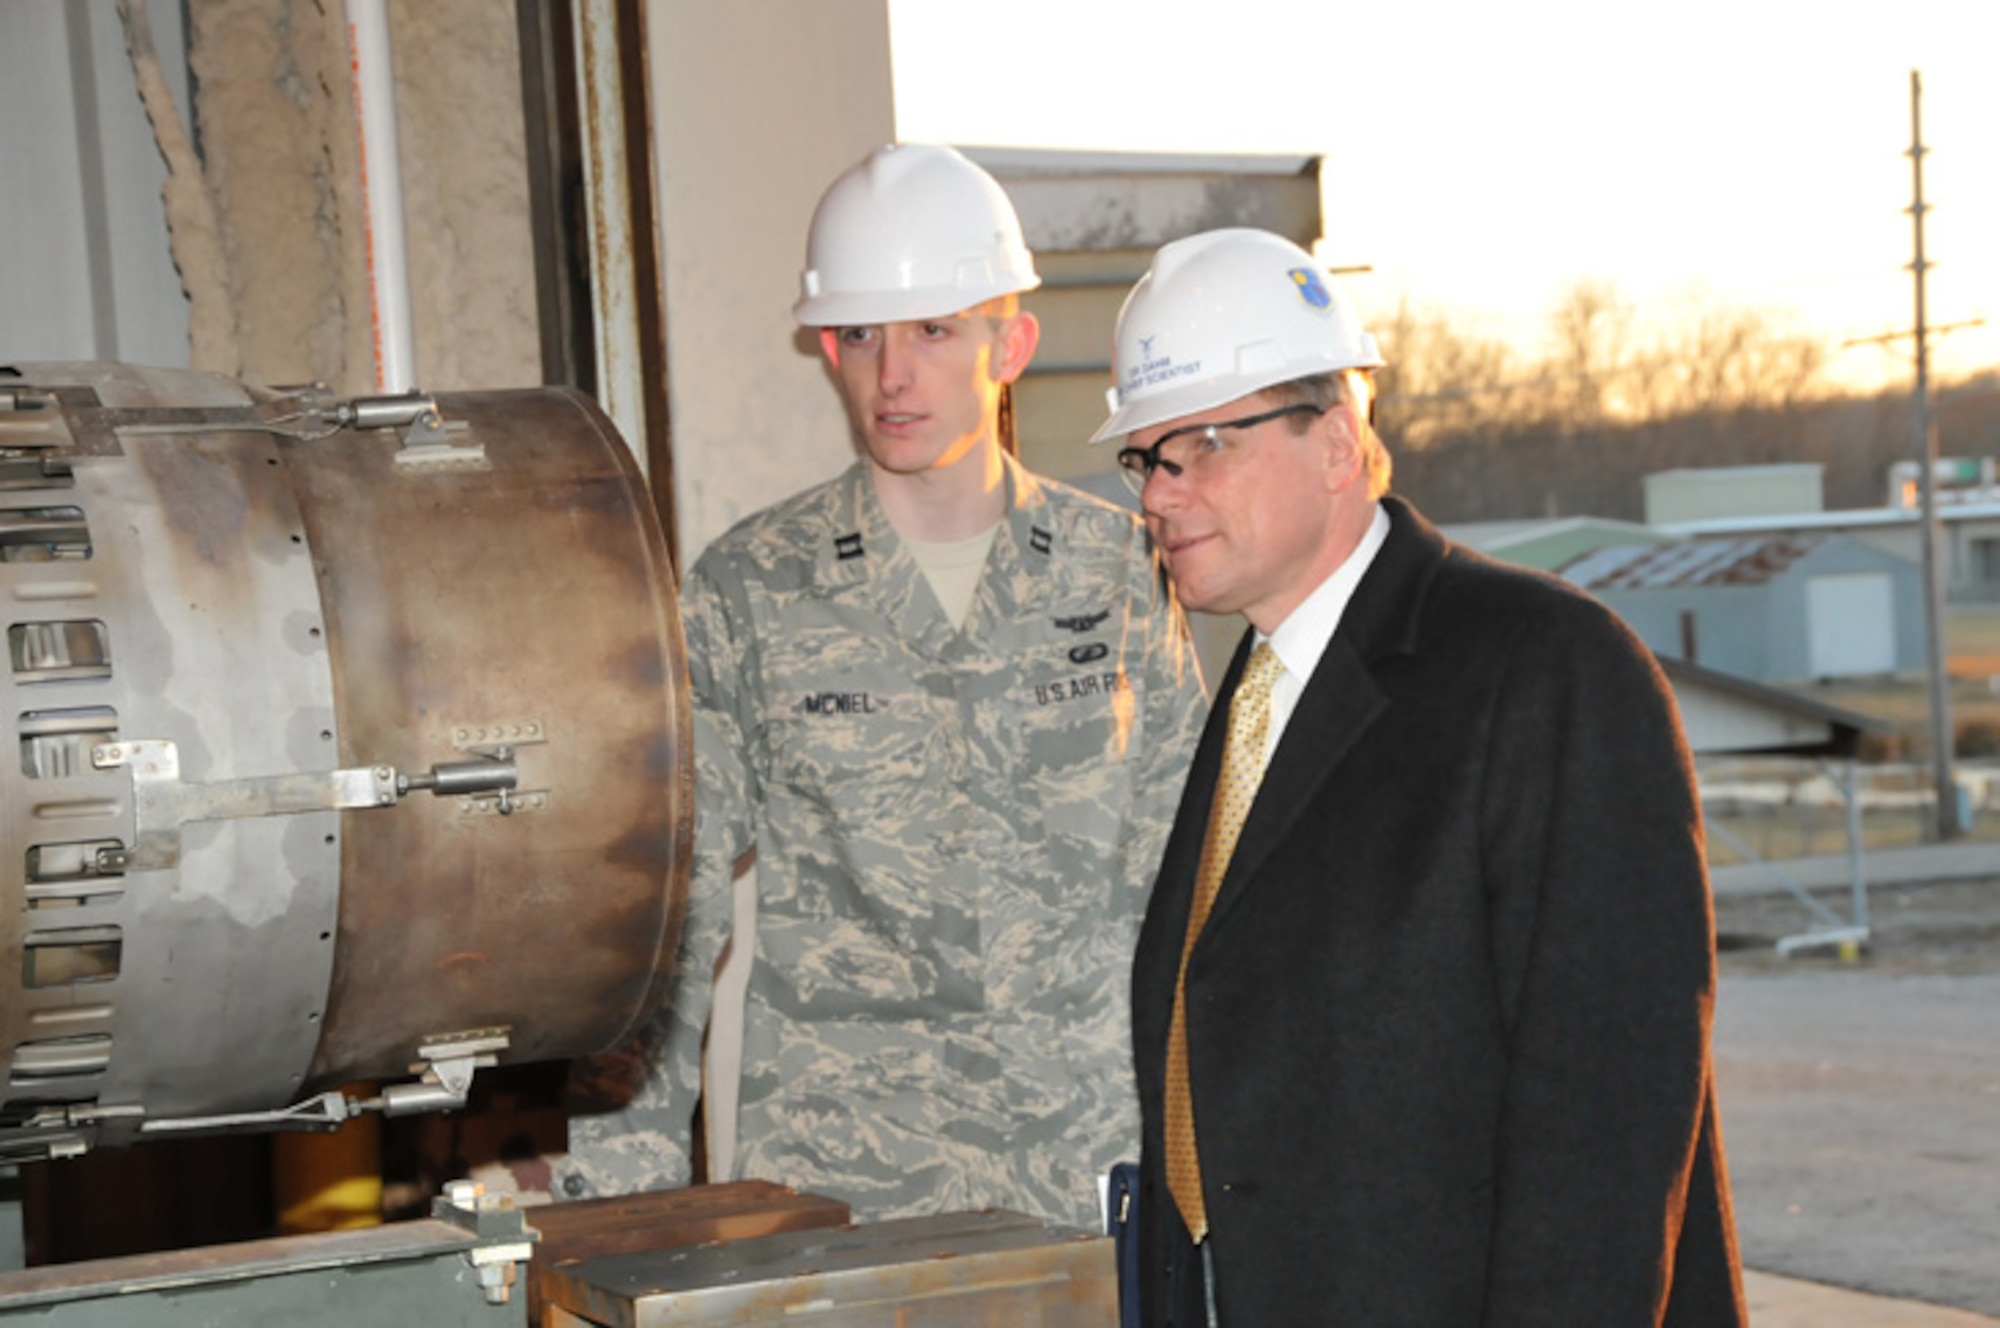 In February, Capt. Chuck McNiel, an aeropropulsion test technology program lead with Arnold Engineering Development Center’s (AEDC) 649th Test Systems Squadron, showed Air Force Chief Scientist Dr. Werner Dahm the J85 engine being used to test instrumentation at the Propulsion Research Facility on the campus of UTSI. Captain McNiel is the first AEDC military member to be selected for Test Pilot School since Captain Carmen Evans left for the school in 2005. Captain McNiel’s class will have 10 pilots, 10 engineers and two navigators.  While at the school, he will fly in numerous trainer, fighter, bomber and other types of aircraft learning experimental test techniques in preparation for conducting flight tests on new and legacy Air Force aircraft. (Photo by David Housch)